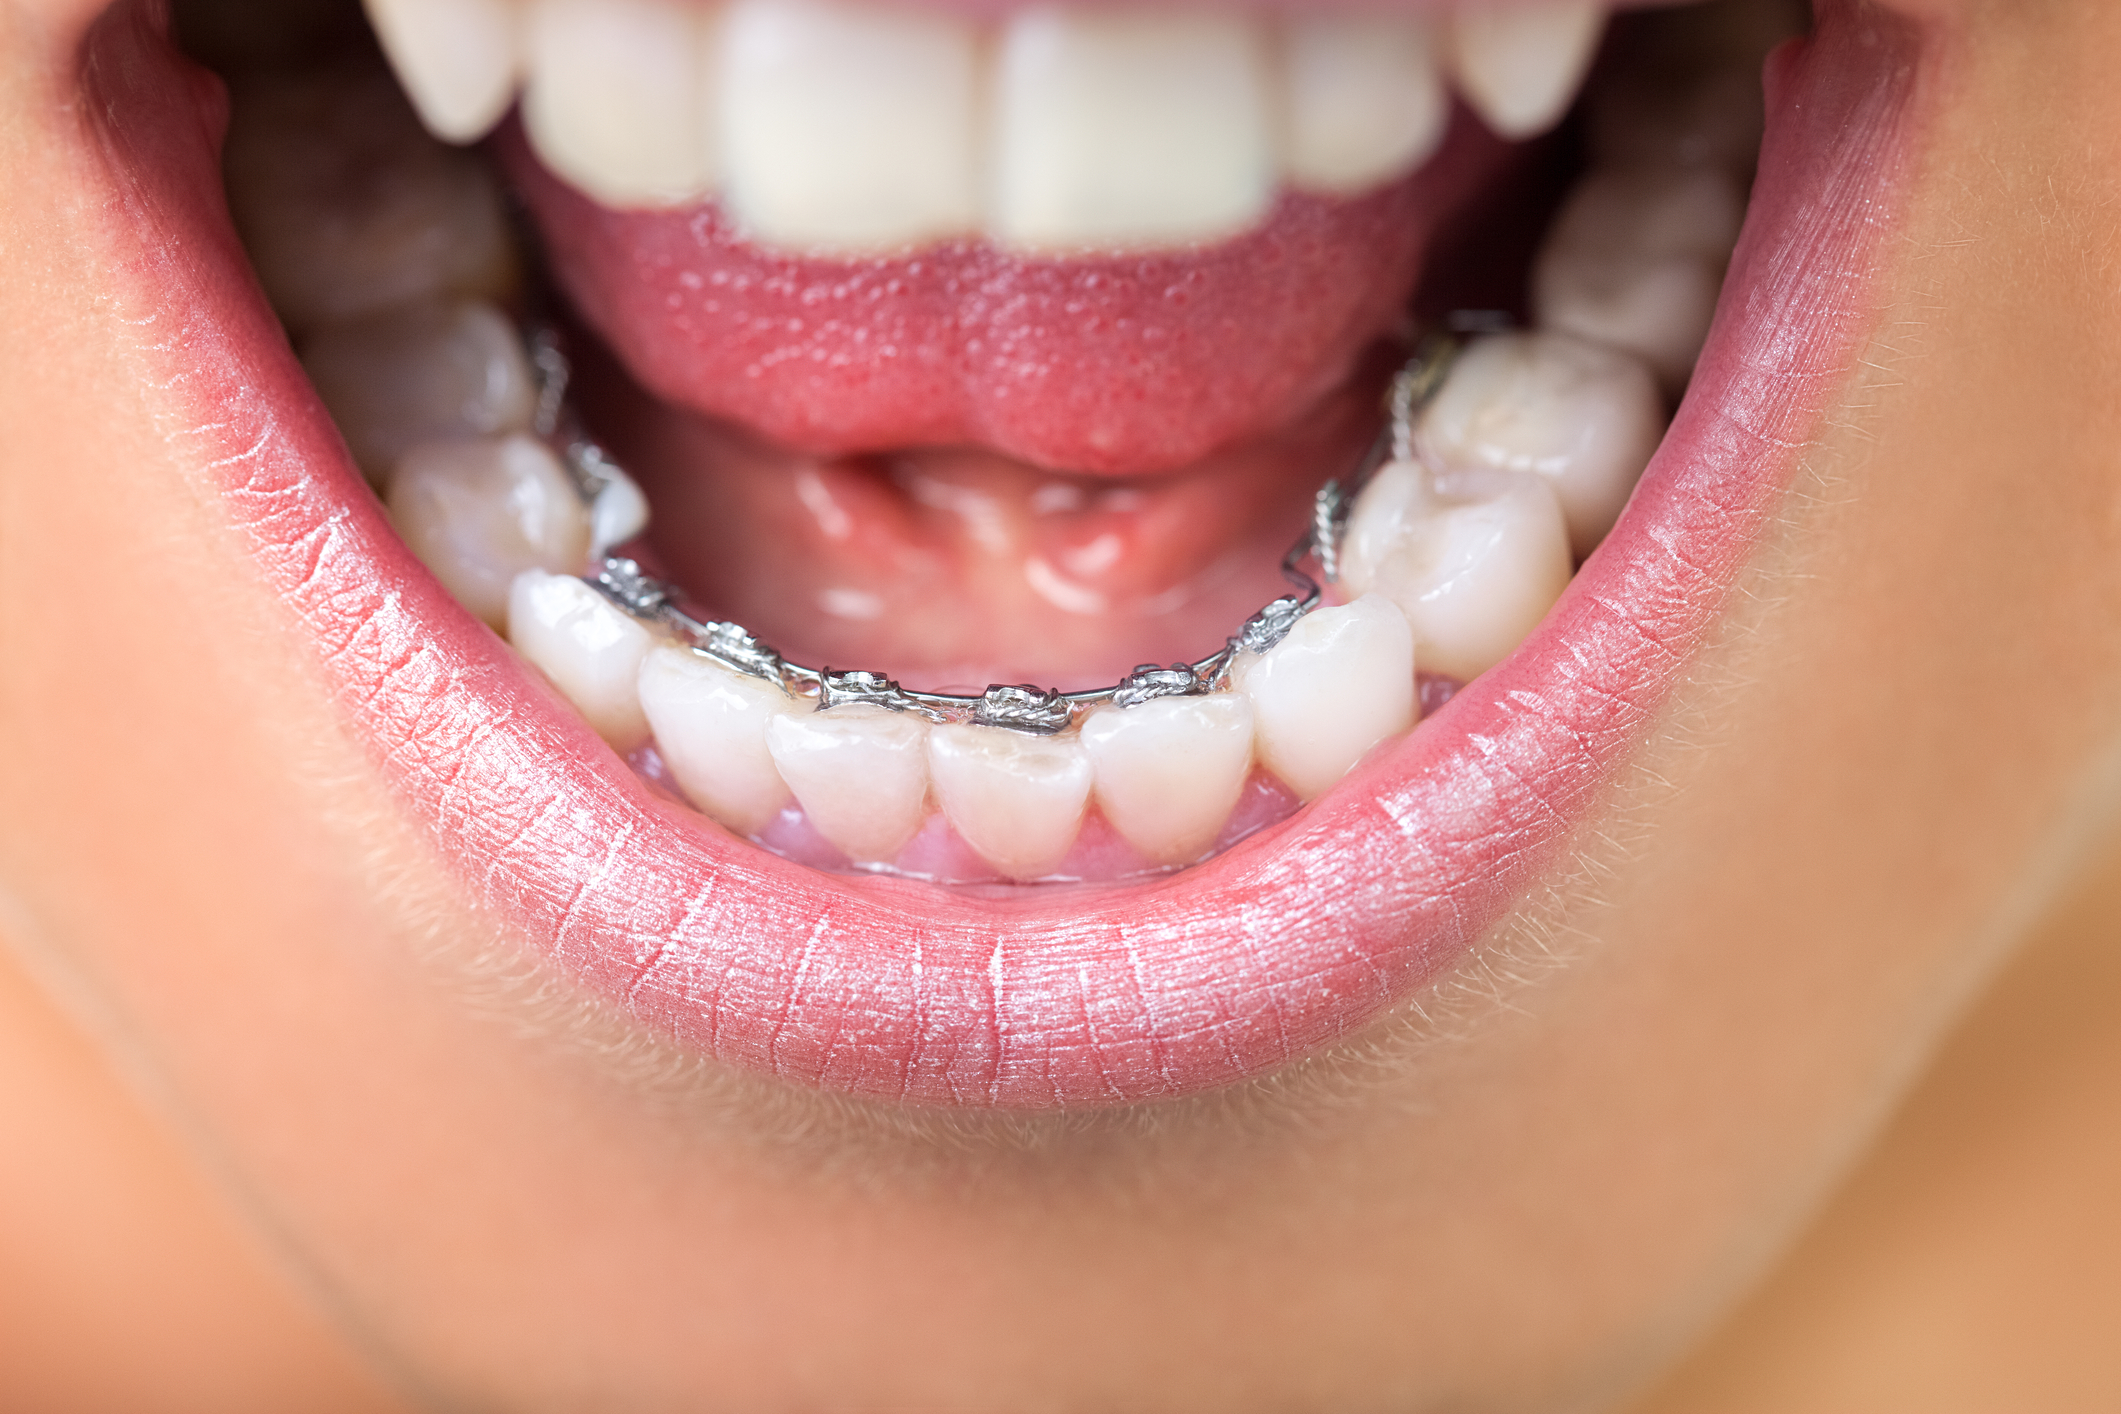 lingual braces are hidden and best for adults